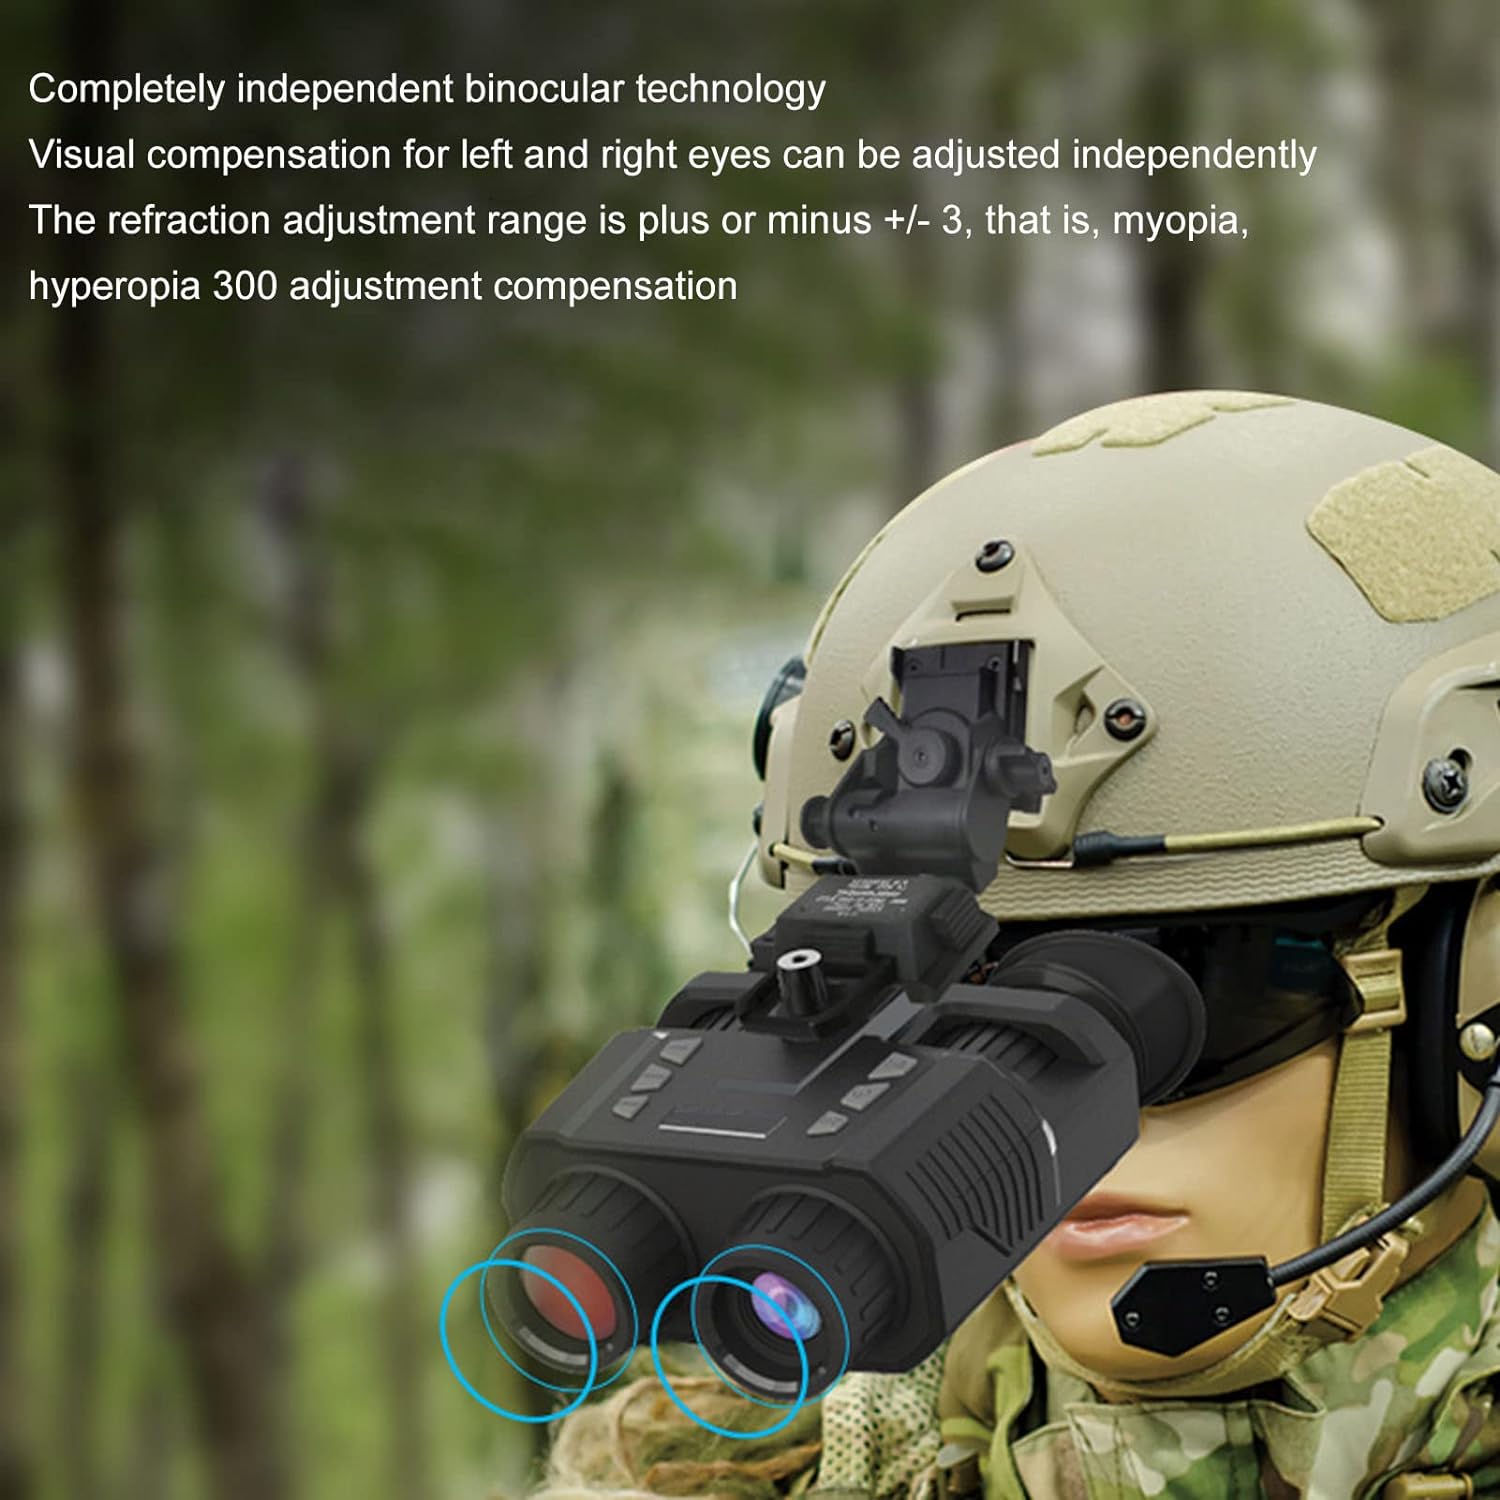 2023 Upgrade New Digital Night Vision Binoculars Gifts 1080p FHD Infrared Digital Goggles for Hunting Camping Surveillance Head Mounted Telescope 4X Zoom